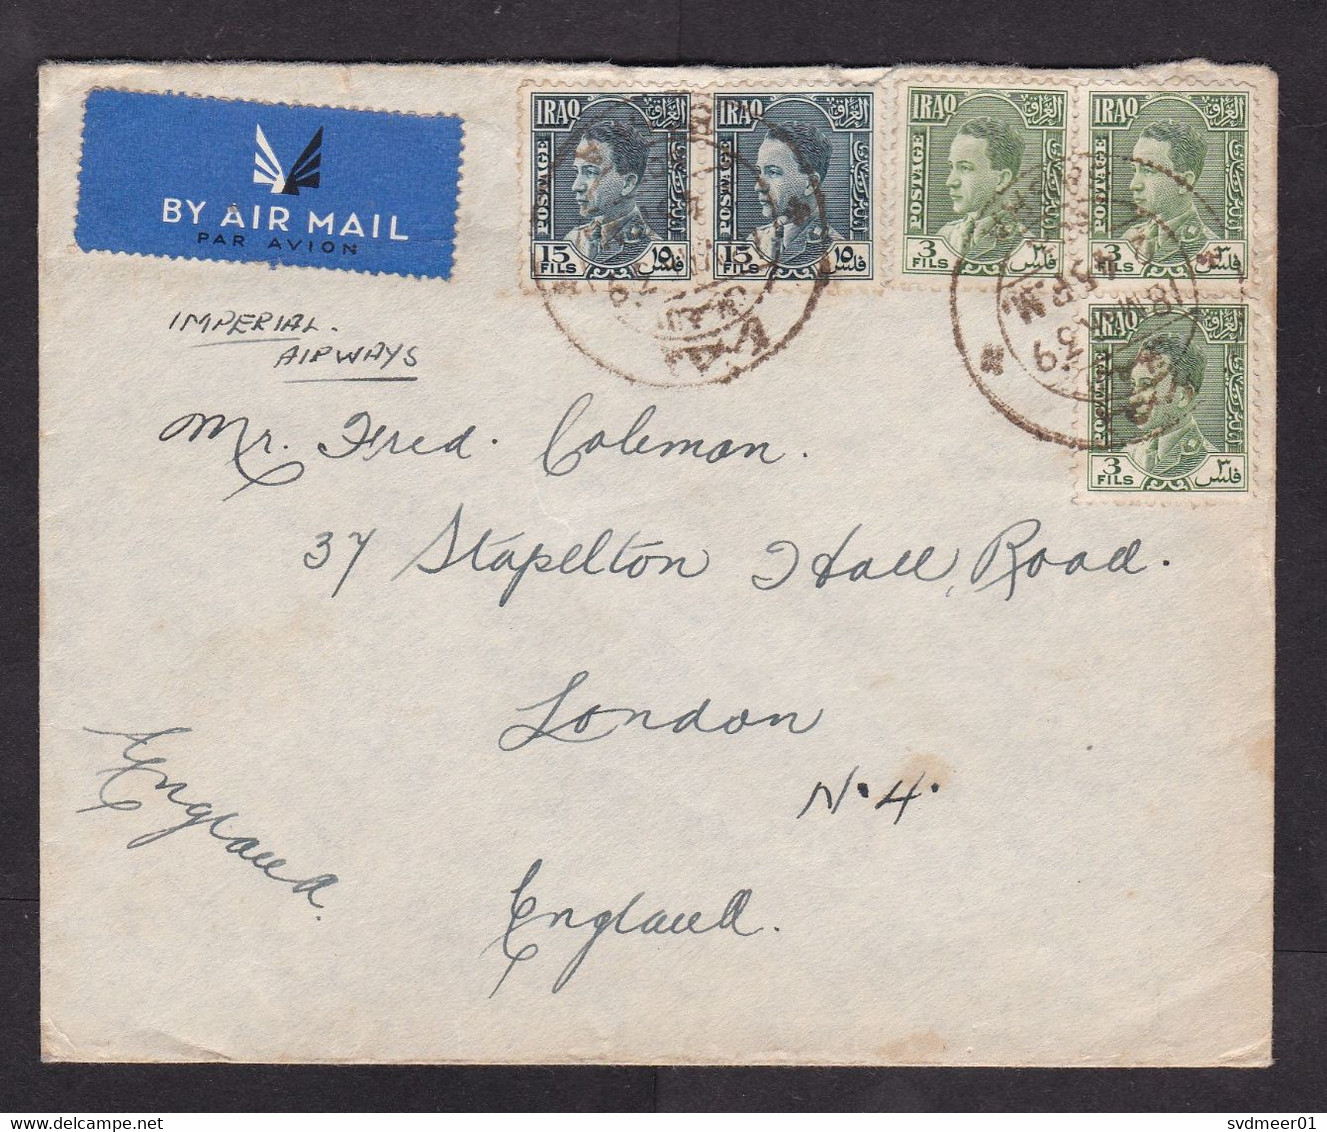 Iraq: Airmail Cover To UK, 1939, 5 Stamps, King, Via Imperial Airways, From RAF Military (minor Damage, See Scan) - Irak